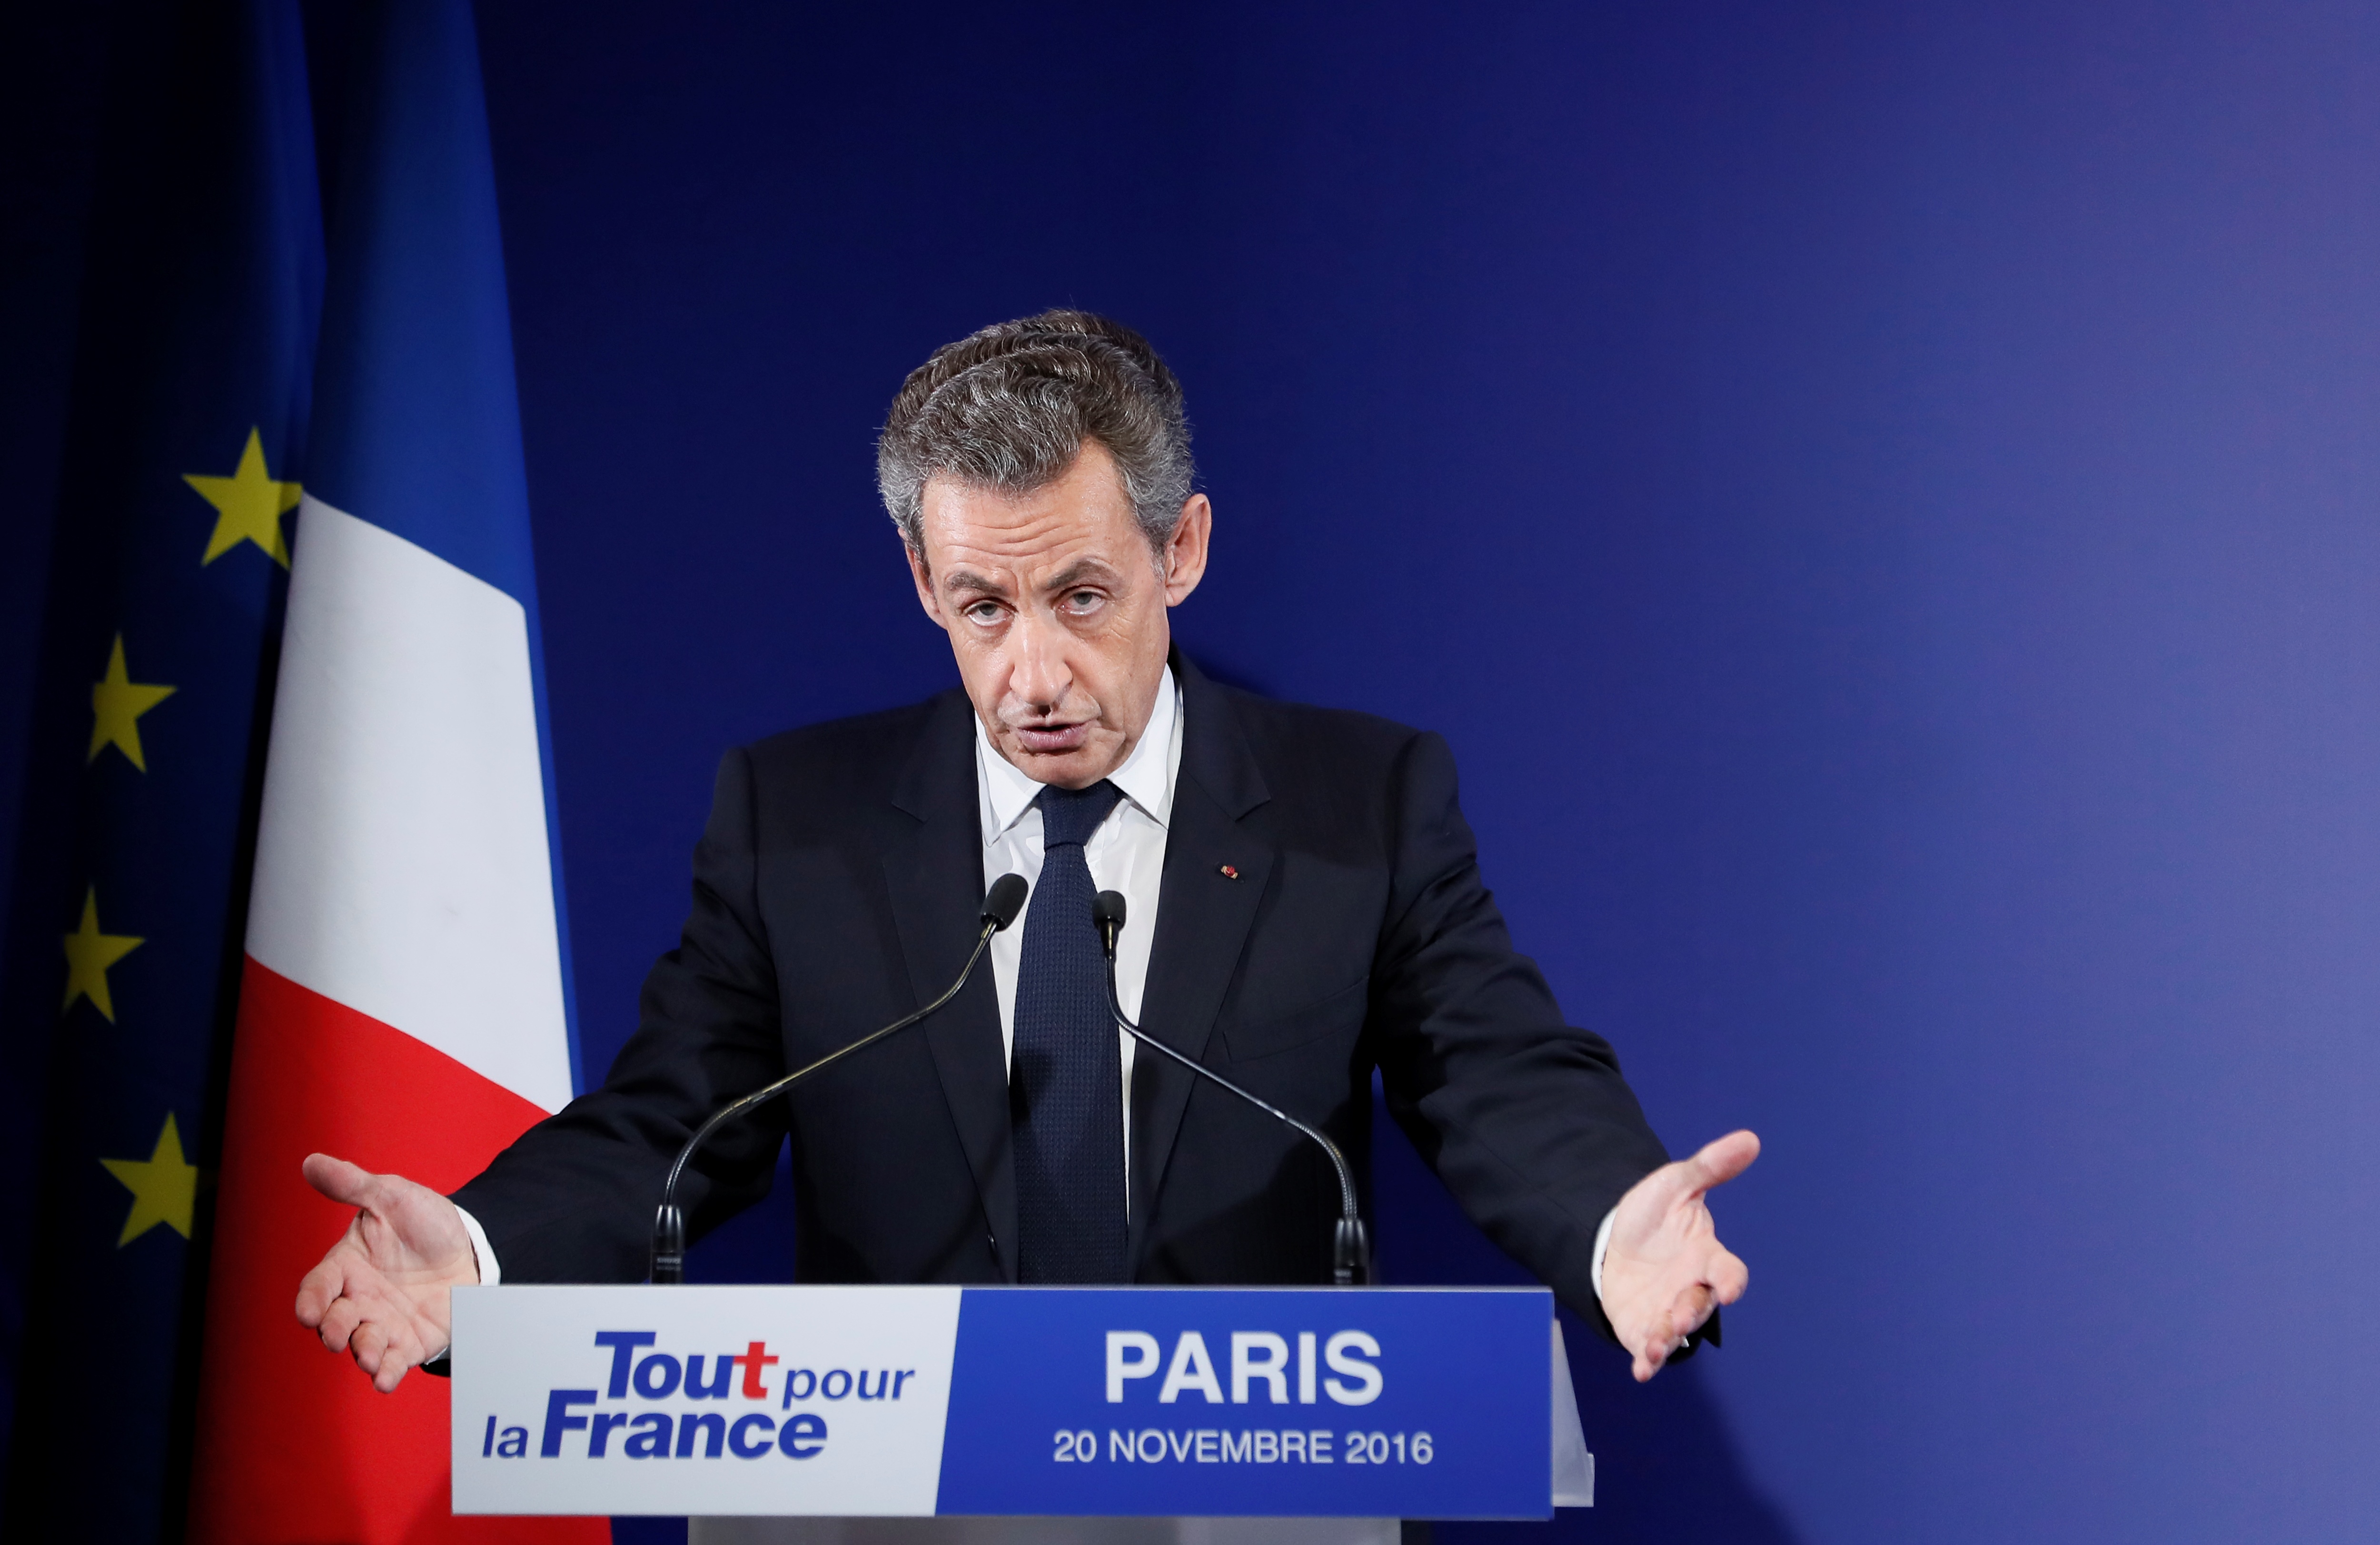 Former French President and candidate for the French right-wing presidential primary  Nicolas Sarkozy delivers a speech at his campaign headquarters after the vote's first round, on November 20, 2016 in Paris.  Francois Fillon took a commanding lead in the two-round primary that is widely expected to decide the country's next leader. In a major upset, Fillon had more than 43 percent of the vote to 26.7 percent for former prime minister Alain Juppe and just under 23 percent for Nicolas Sarkozy, according to the official tallies.  / AFP PHOTO / POOL / IAN LANGSDON